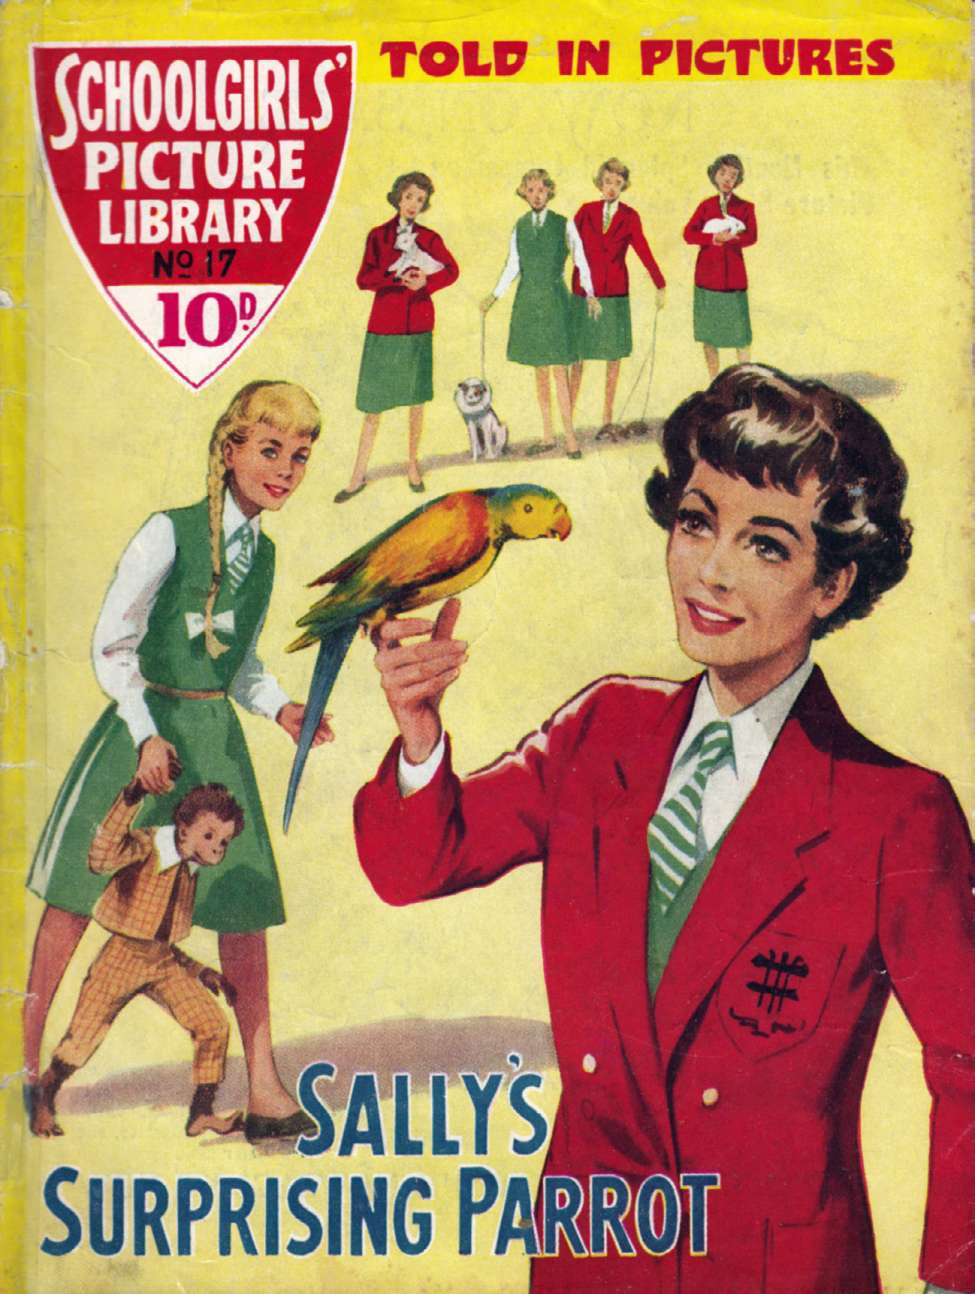 Book Cover For Schoolgirls' Picture Library 17 - Sally's Surprising Parrot